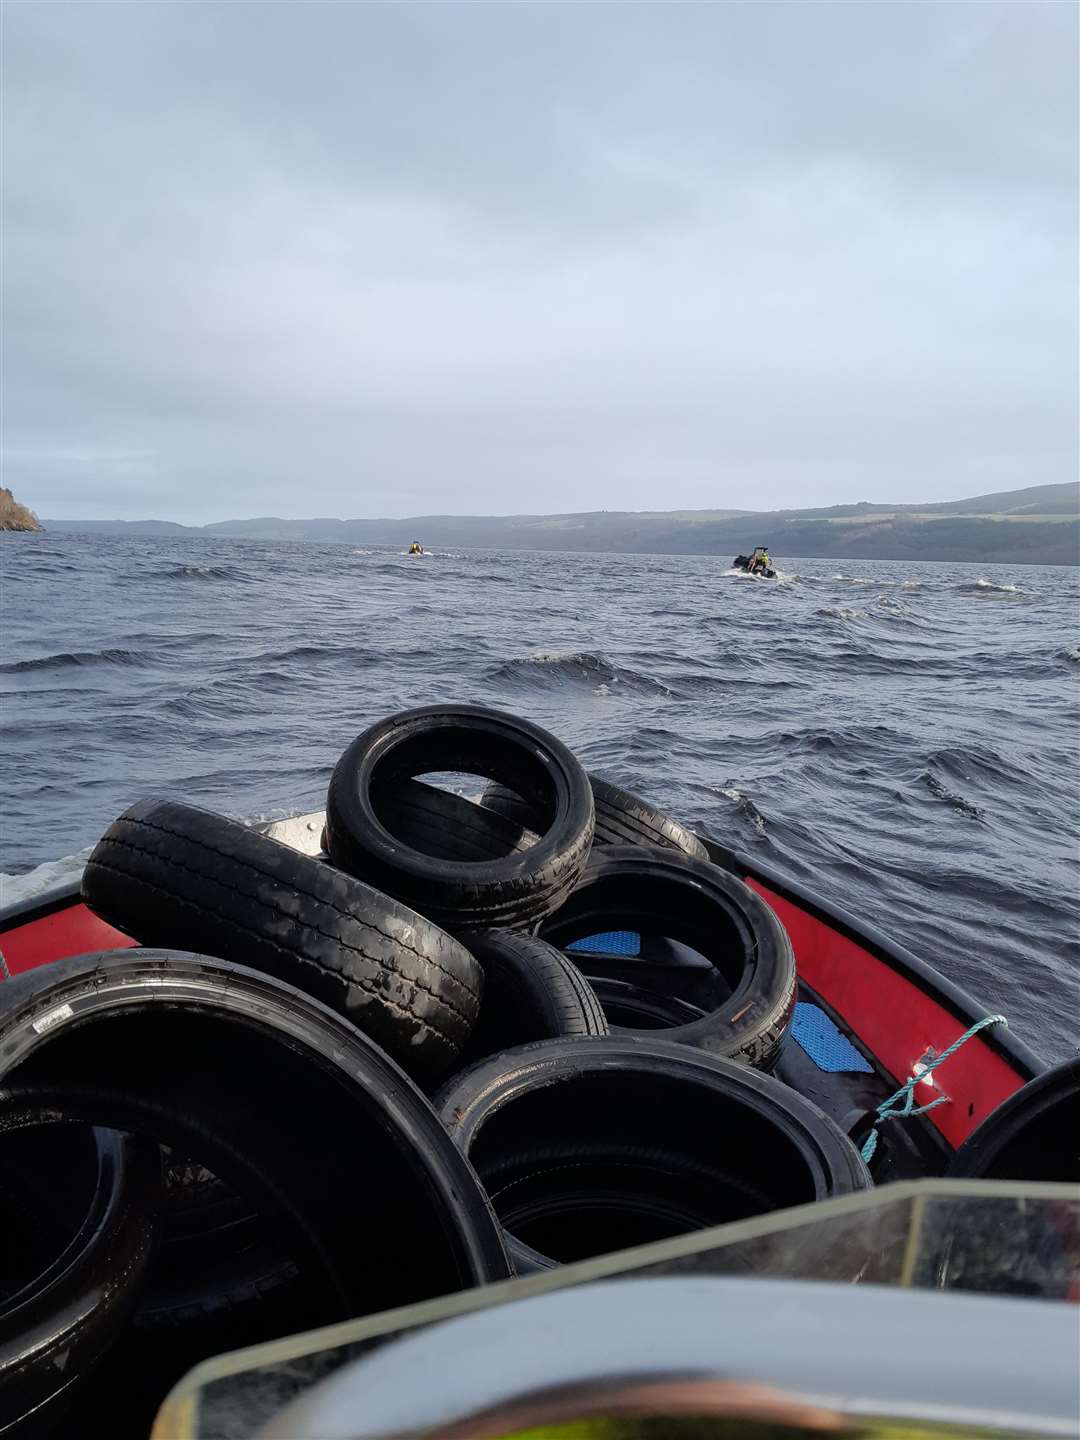 The tyres are collected in boats.